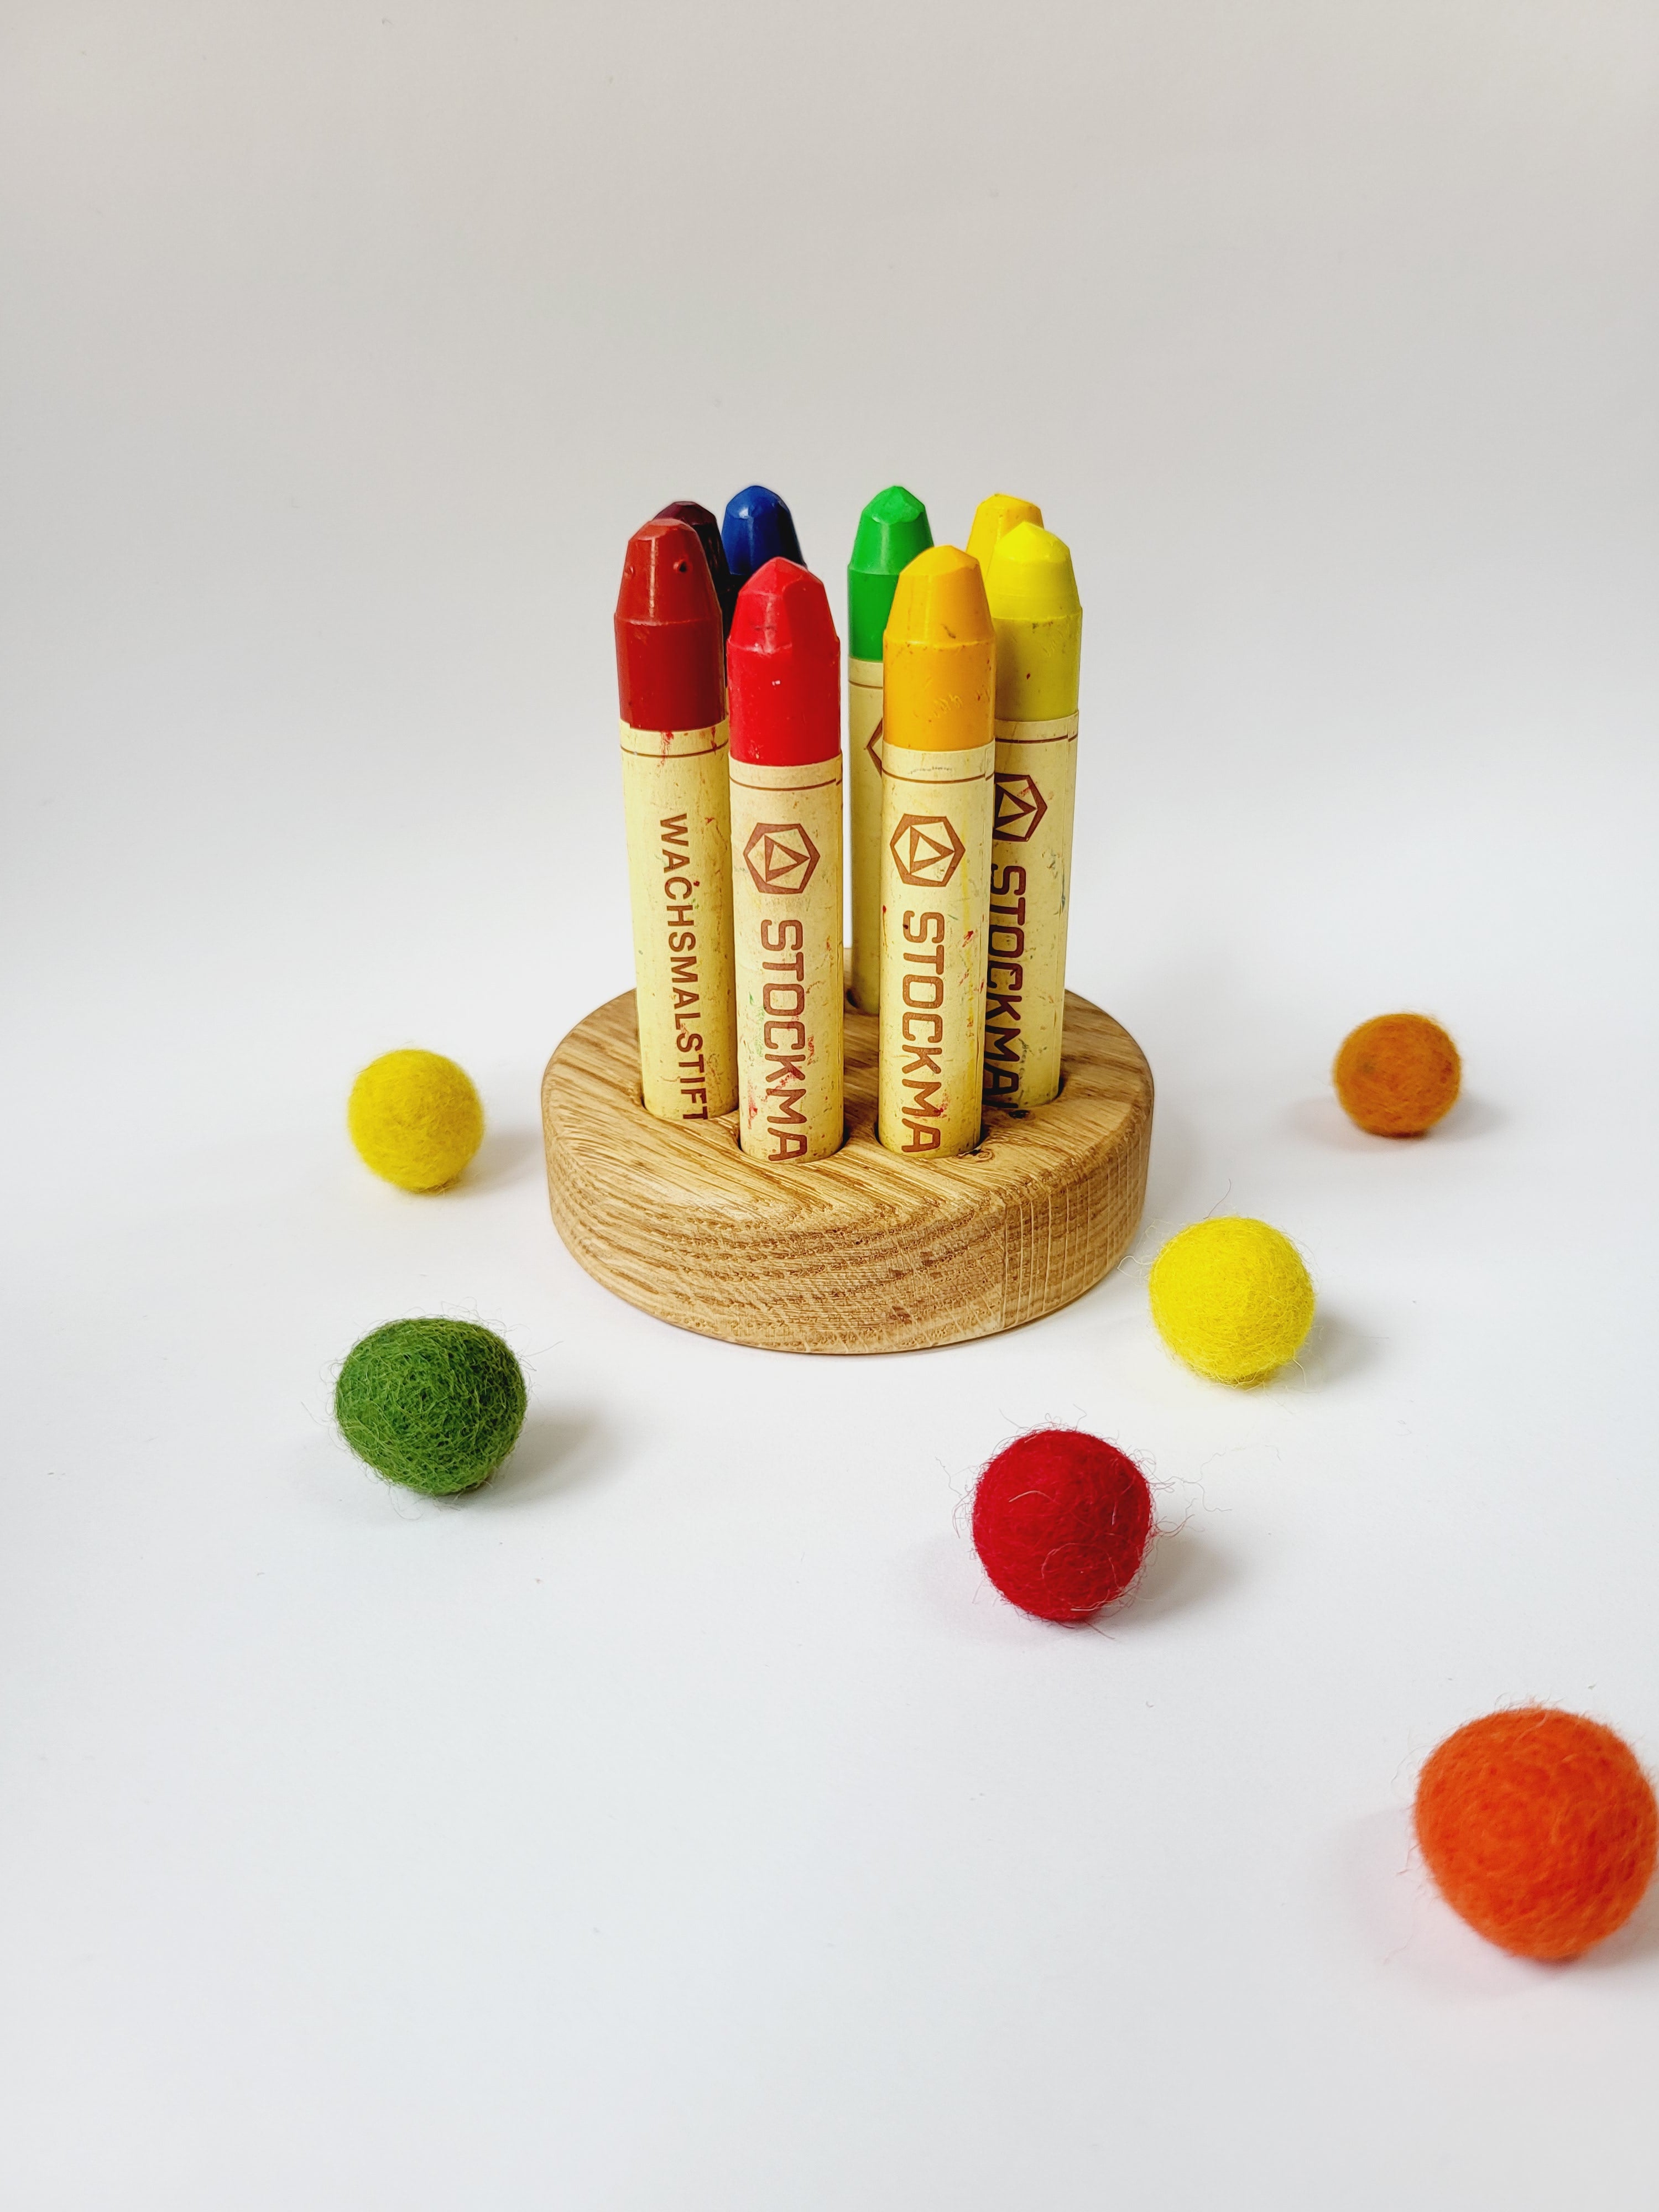 Stockmar crayon holder for 8 sticks, desk organization waldorf crayon holder,  personalized gift for kids wooden holder without crayons